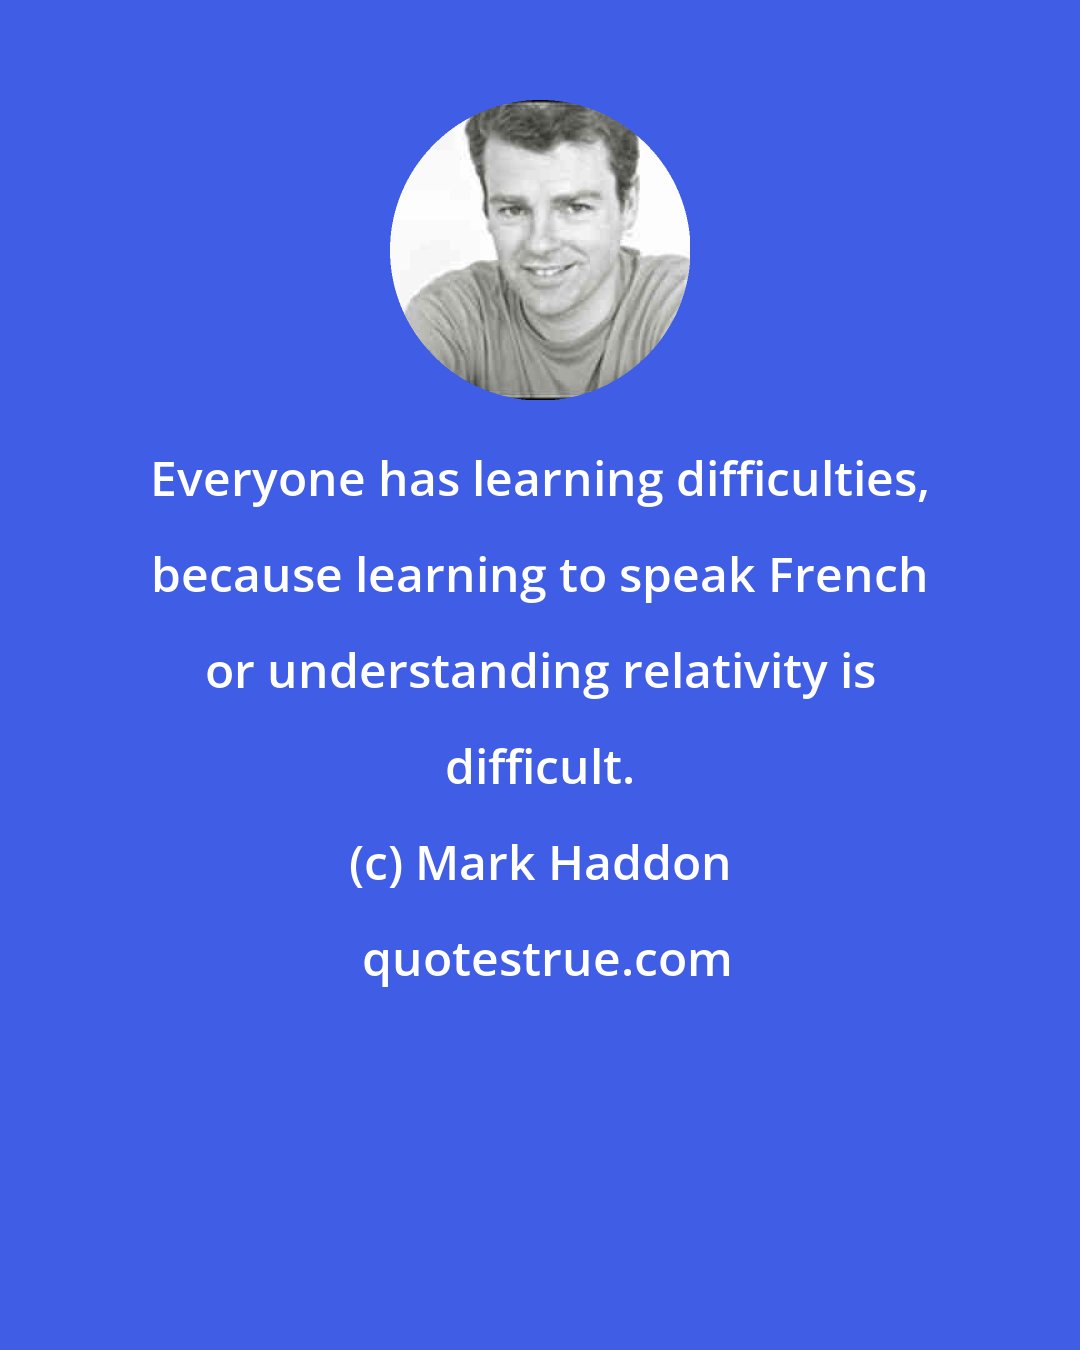 Mark Haddon: Everyone has learning difficulties, because learning to speak French or understanding relativity is difficult.